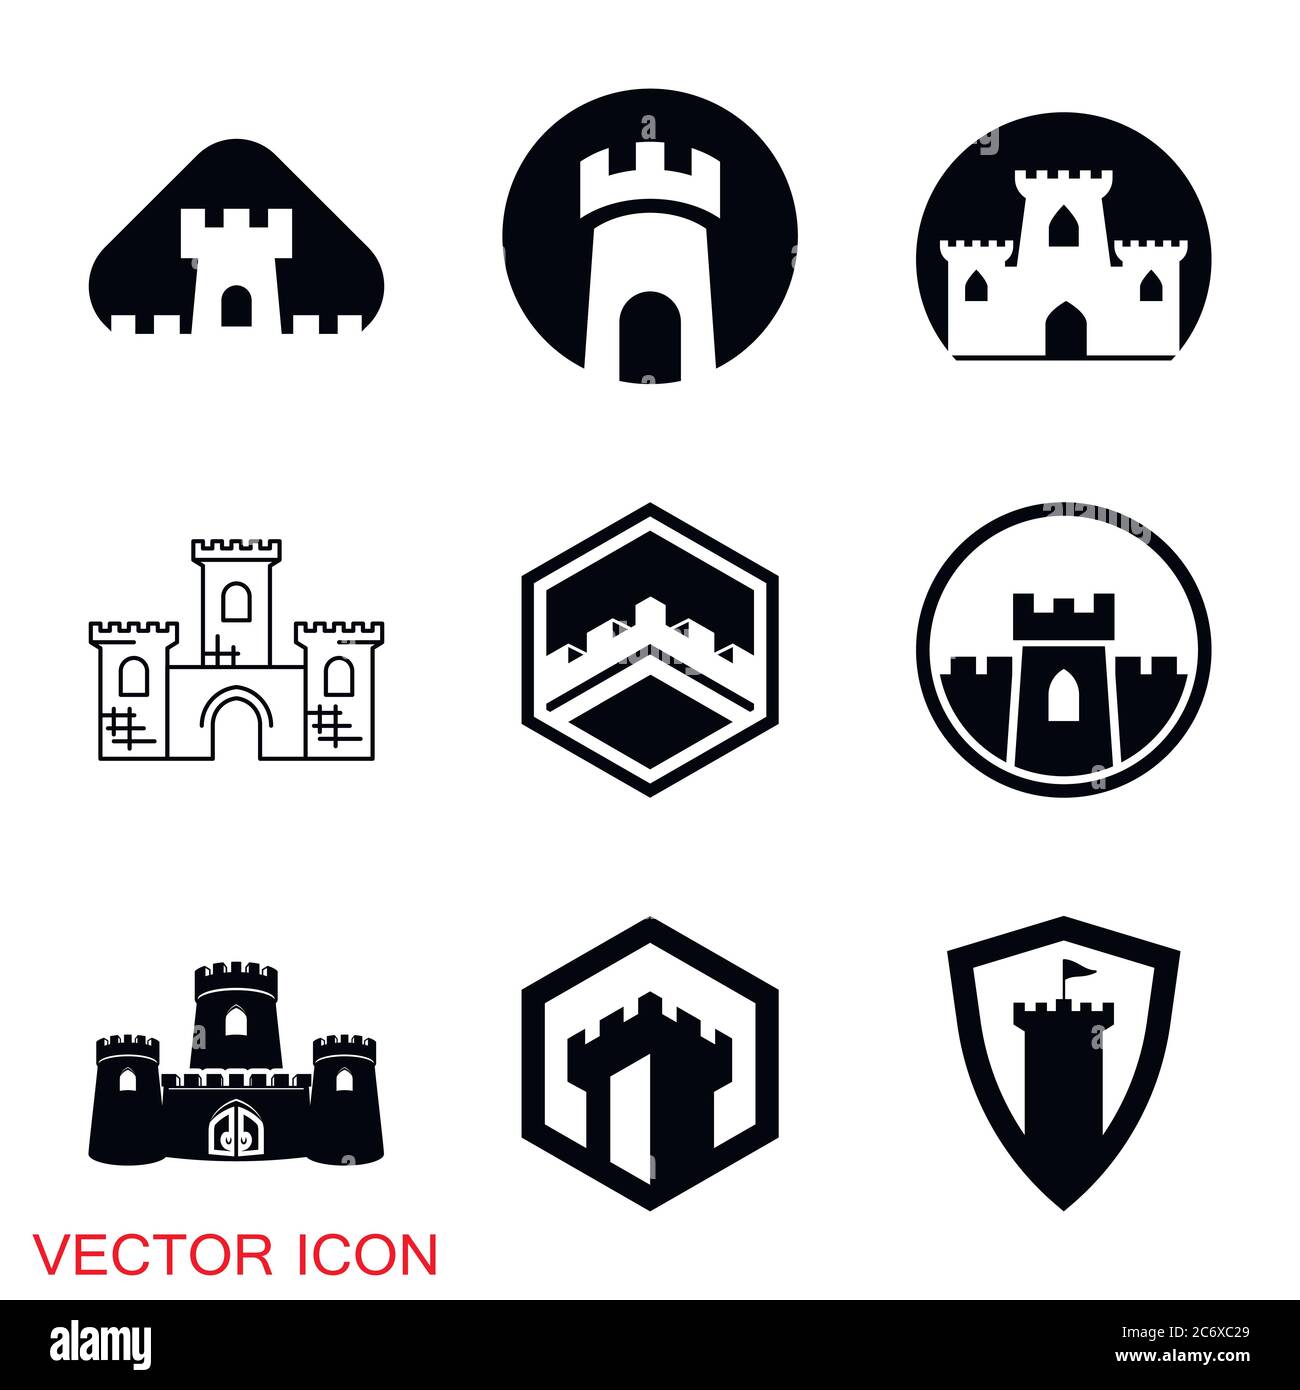 infographic icons castle